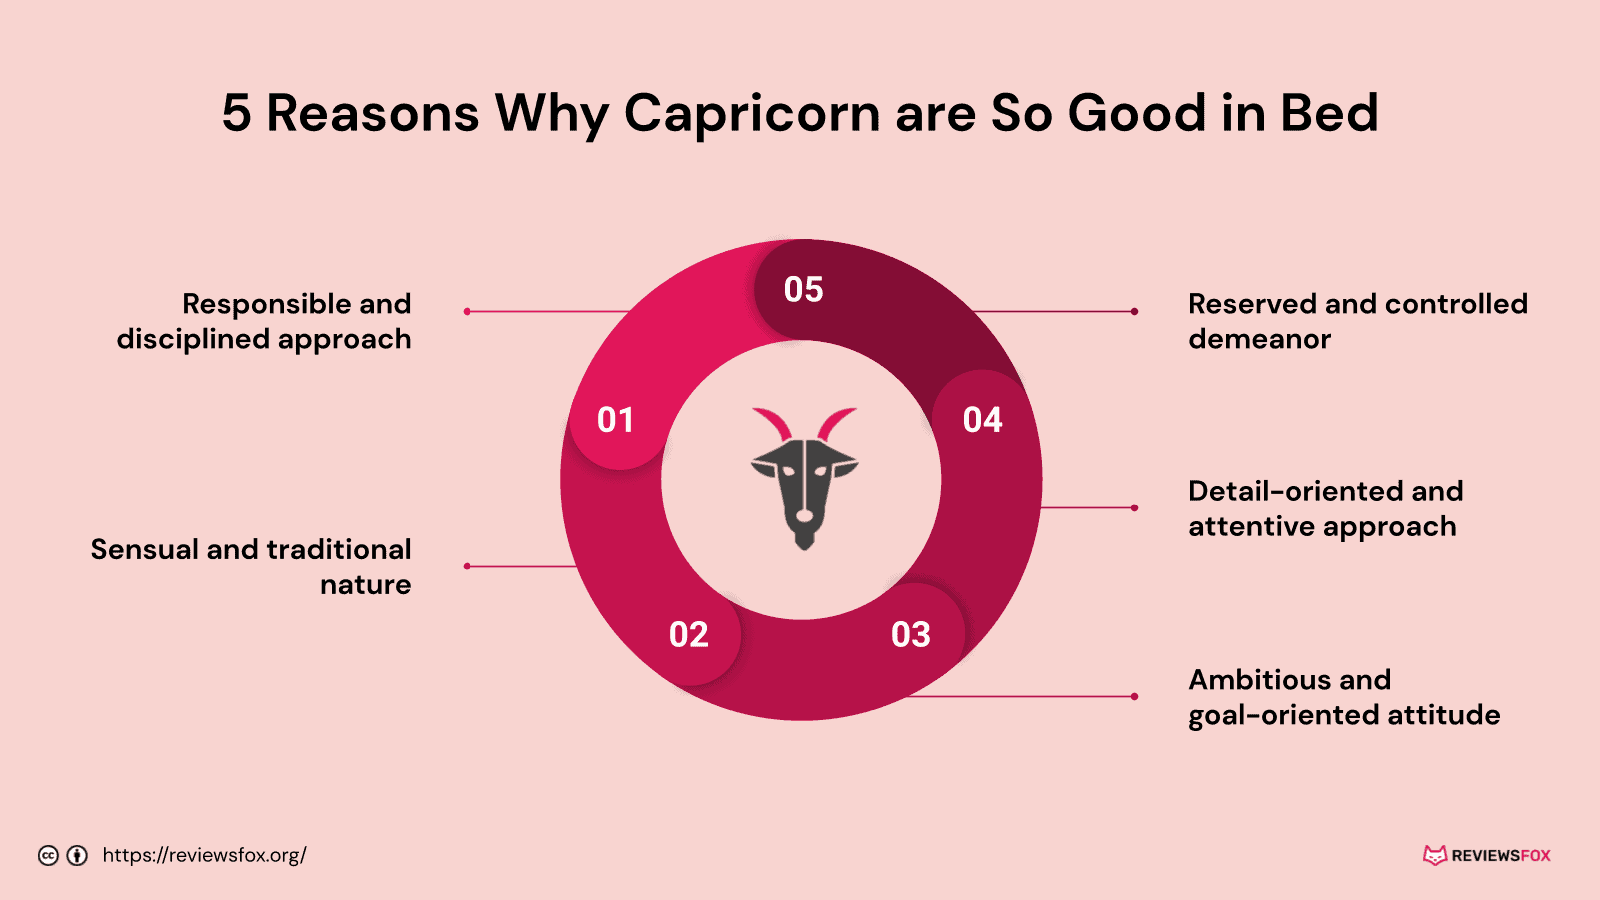 Why are Capricorn So Good in Bed?